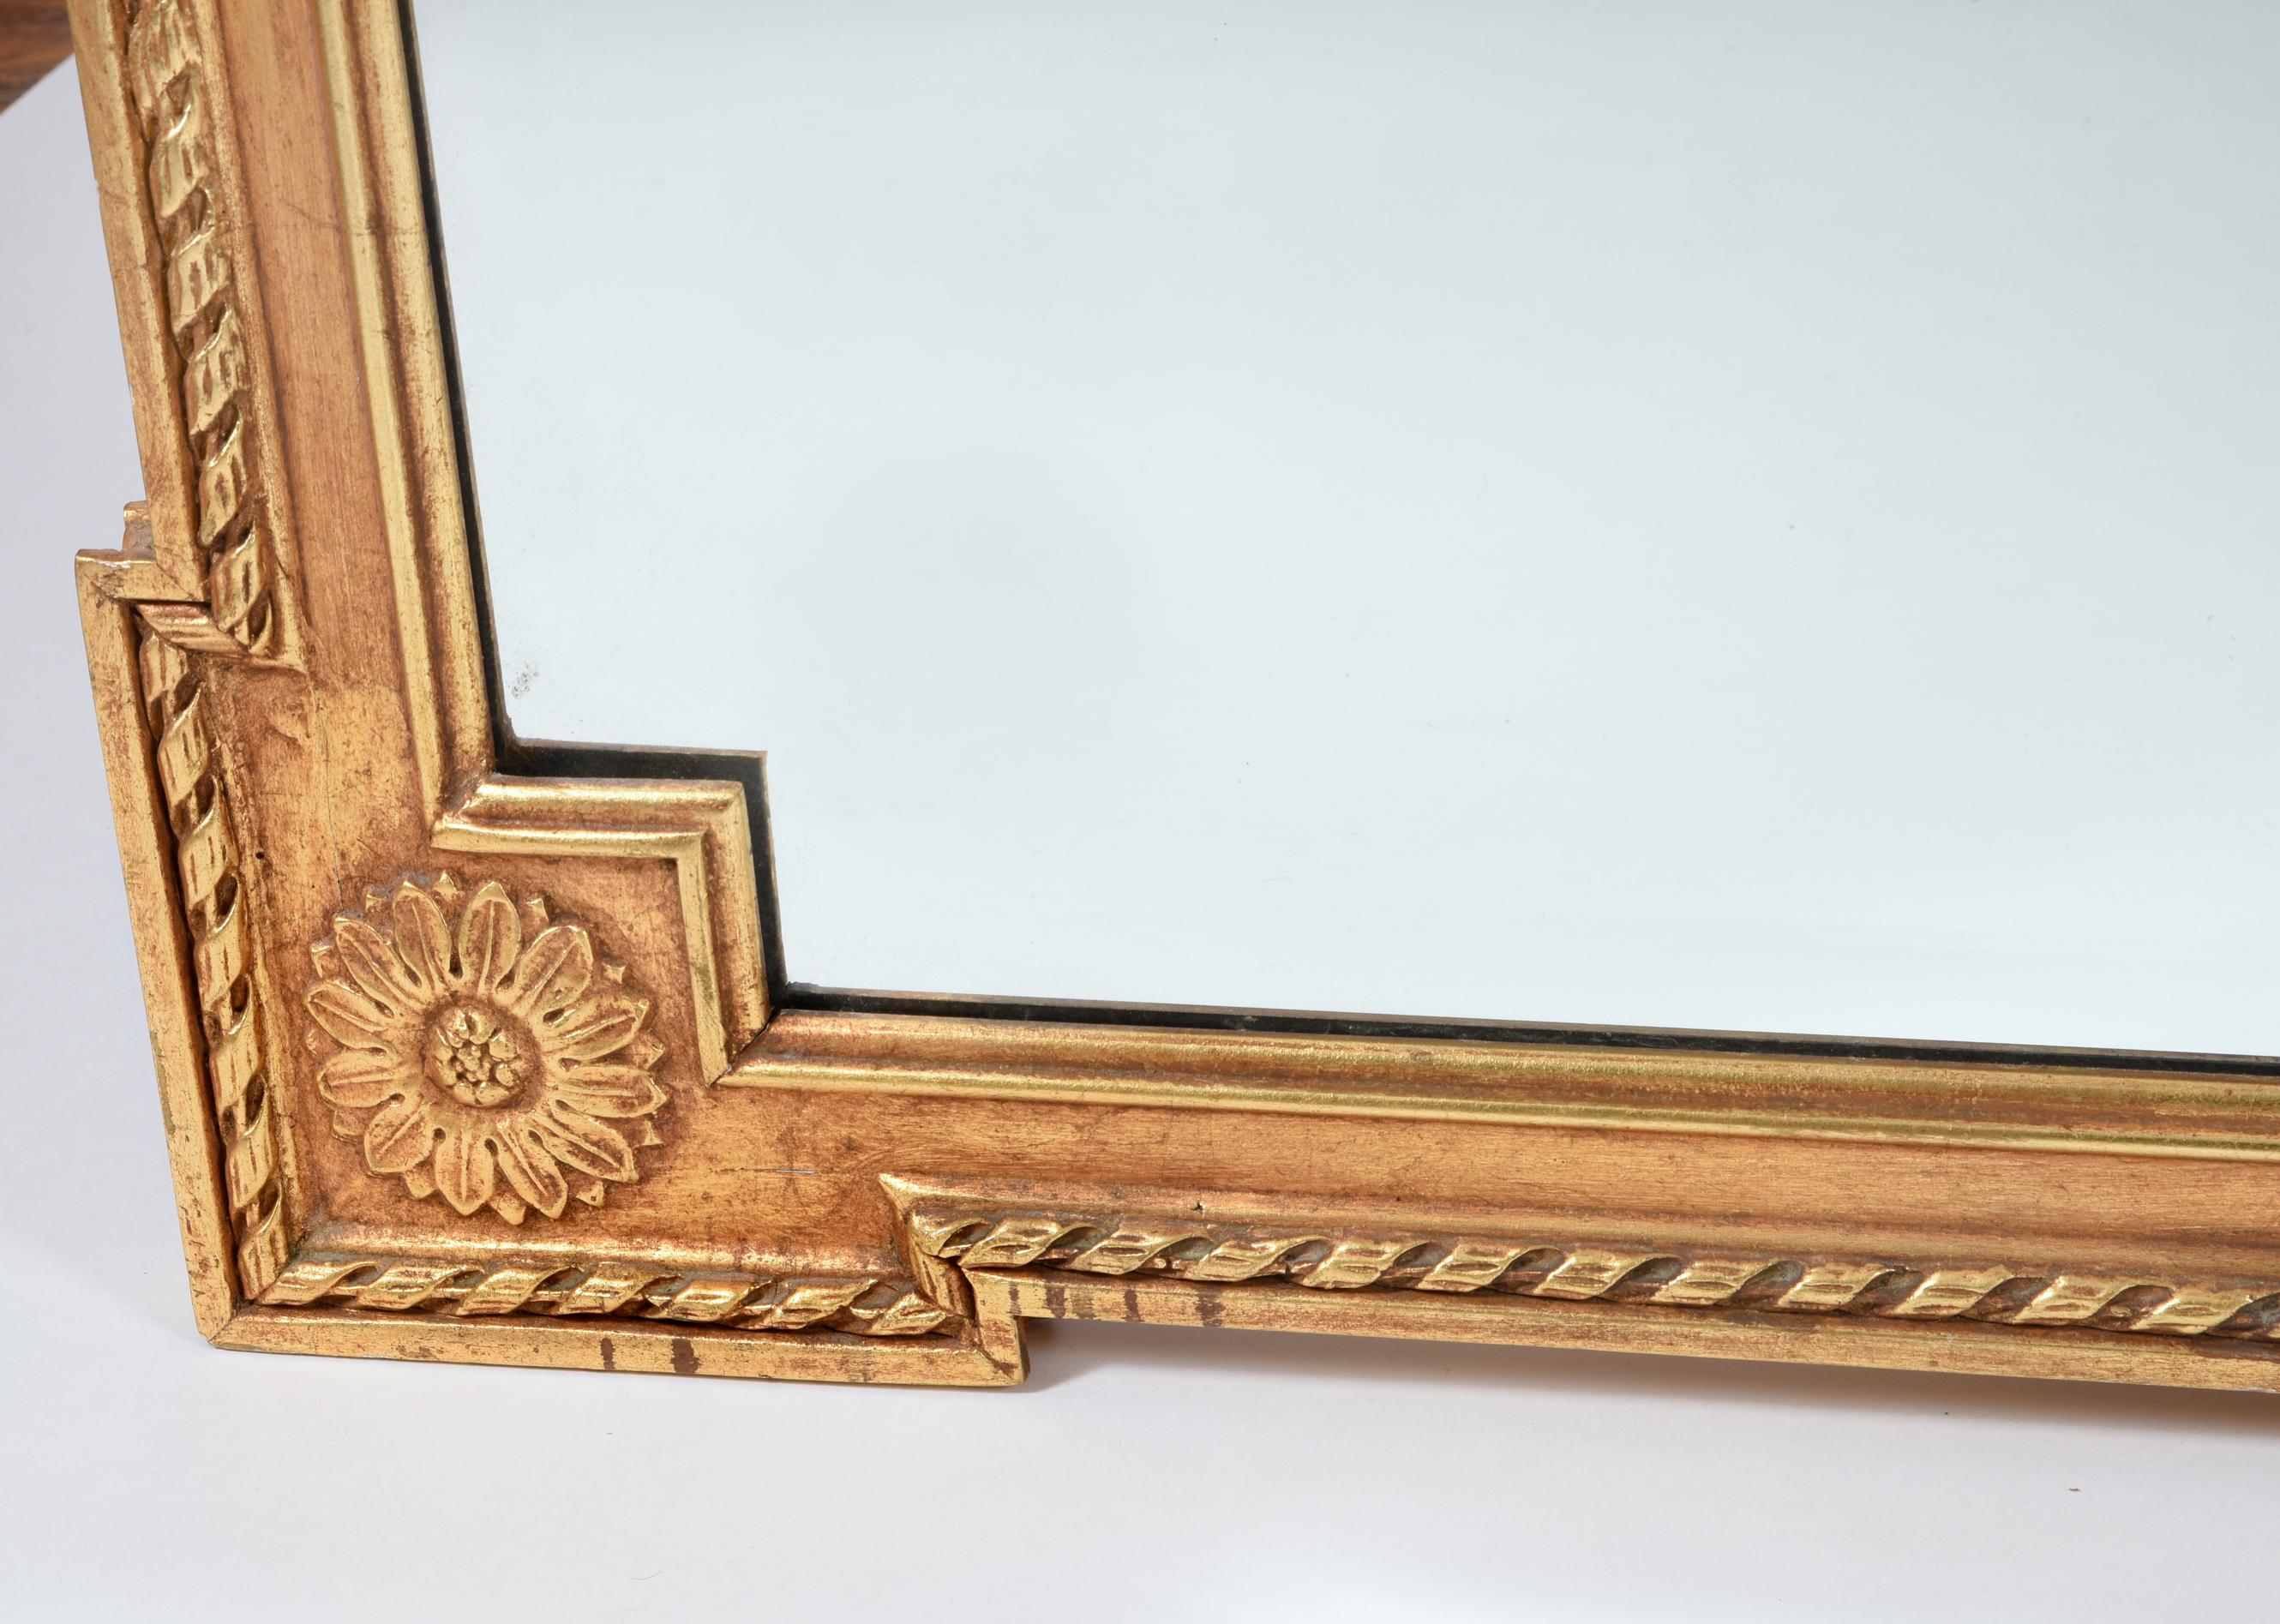 Early 20th century matching pair giltwood frame beveled hanging wall mirror. This Mirror is just exquisite and in excellent vintage condition. The mirror have a beautiful wreath crests top and all around design details. The Mirror measure about 46